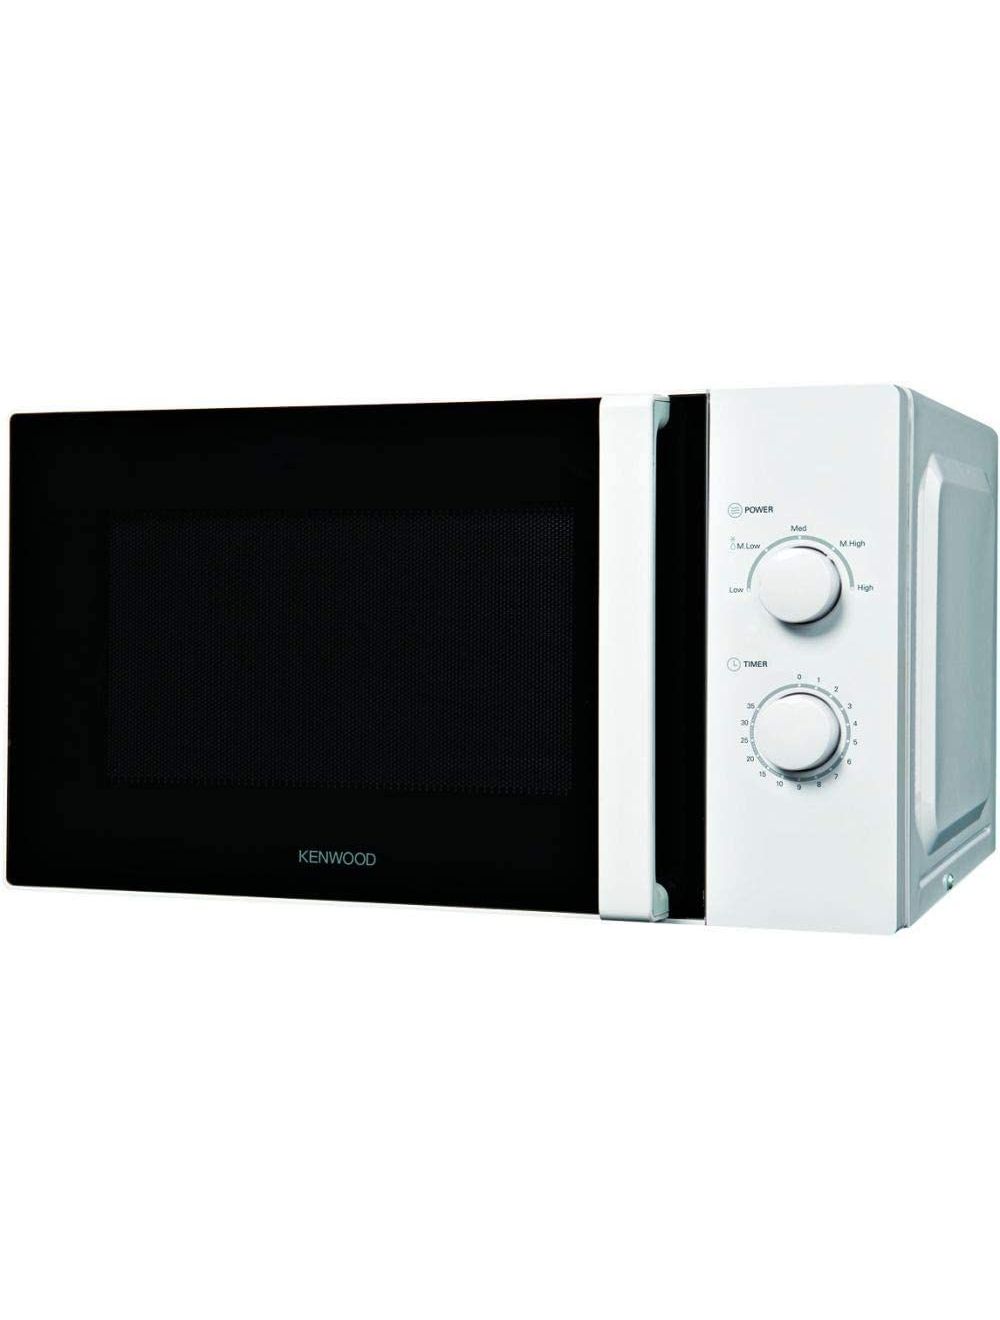 Kenwood 20 Litres Microwave Oven 800 Watts White-MWM100